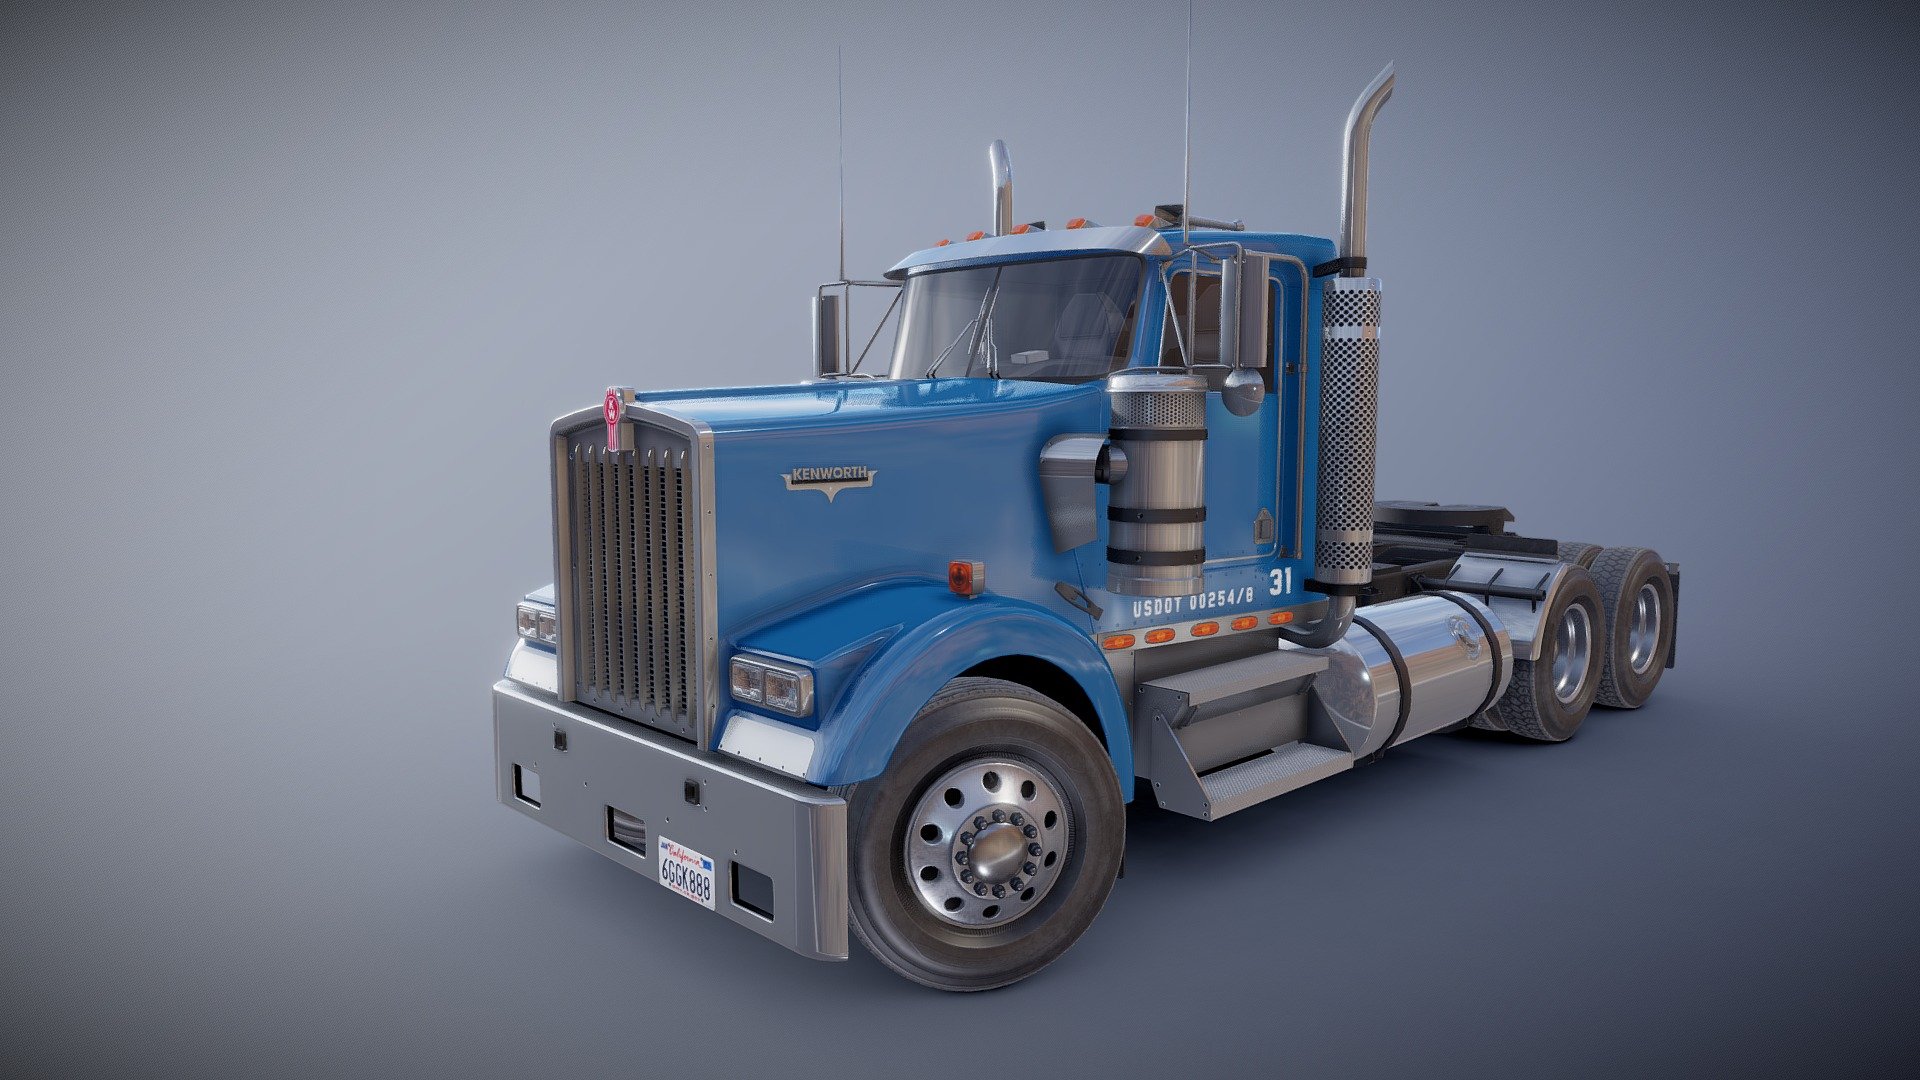 Kenworth daycab truck game ready model.

Full textured model with clean topology.

High accuracy exterior model.

Different tires for rear and front wheels.

High detailed cabin - seams, rivets, chrome parts, wipers and etc.

High detailed rear suspension with axles and other parts.

Lowpoly interior - 1811 tris 1074 verts.

Wheels - 20774 tris 11352 verts.

Full model - 65644 tris 38033 verts.

High detailed rims and tires, with PBR maps(Base_Color/Metallic/Normal/Roughness.png2048x2048 )

Original scale.

Lenght 9.3m , width 3.16m , height 4.1m.

Model ready for real-time apps, games, virtual reality and augmented reality.

Asset looks accuracy and realistic and become a good part of your project 3d model